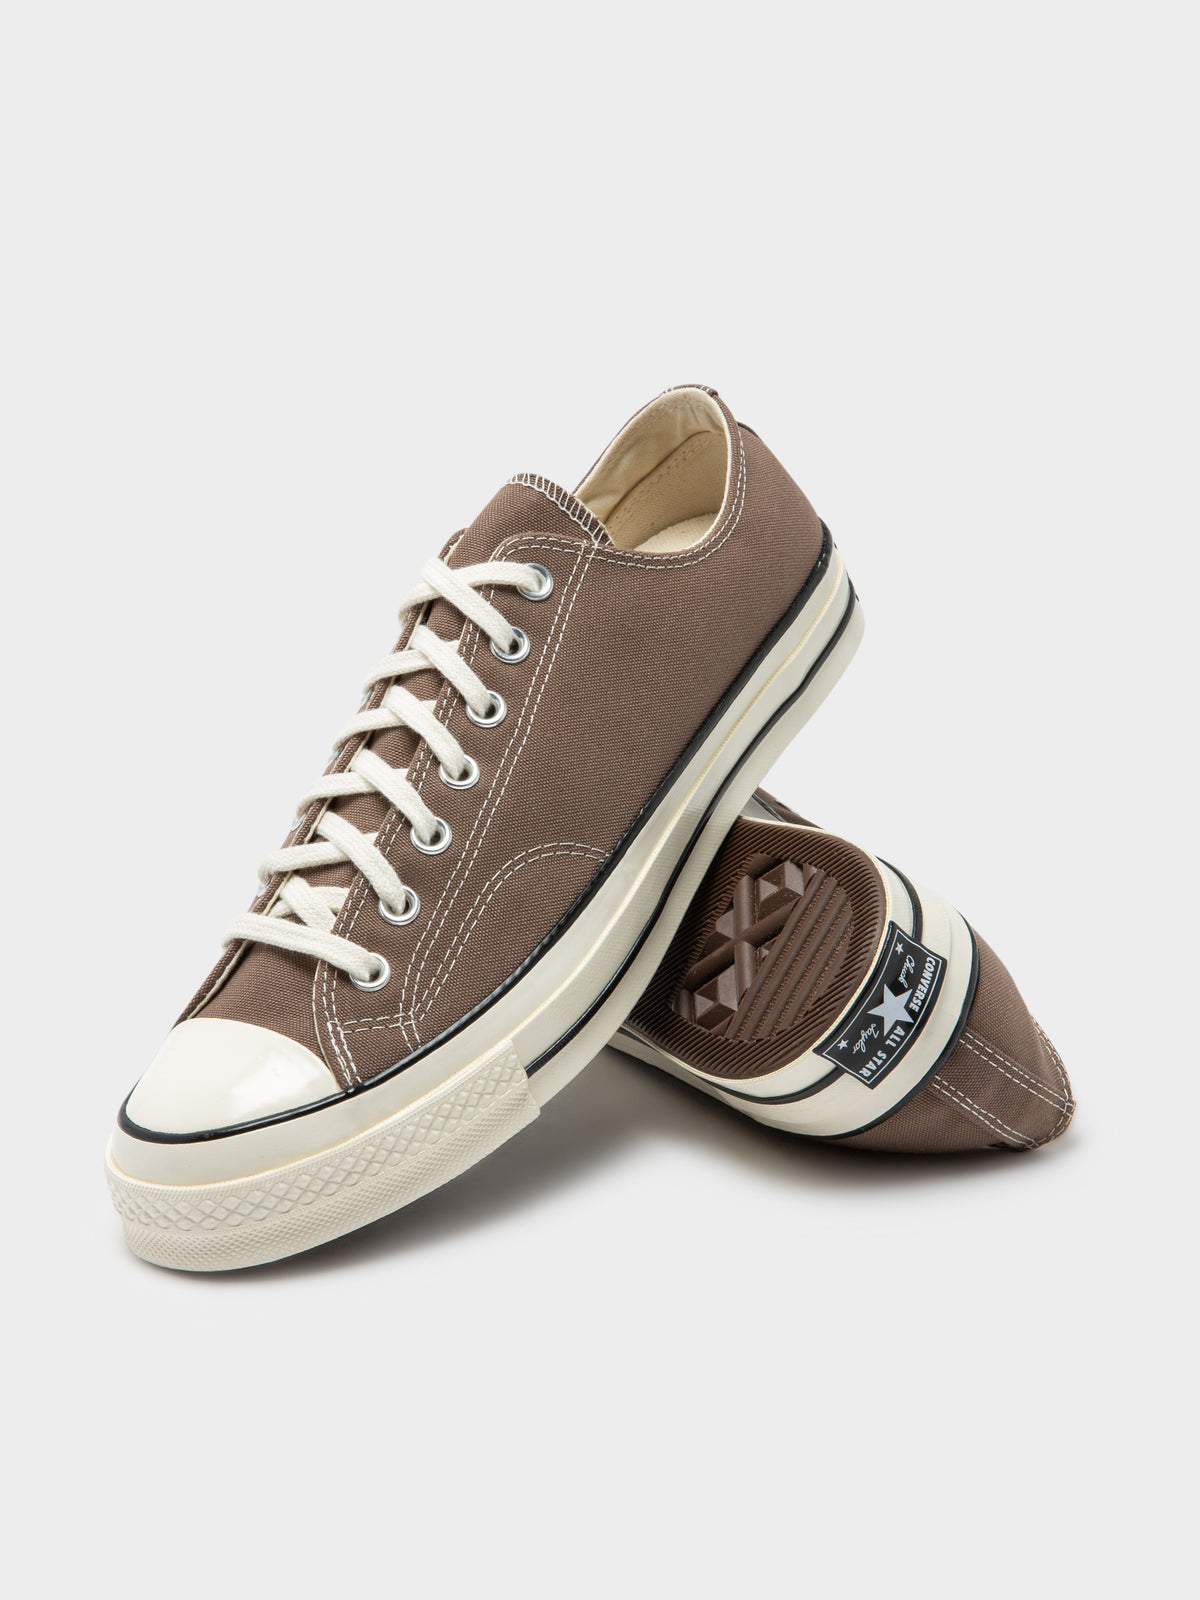 Unisex Chuck 70 Ox Low Sneakers in Brown &amp; White